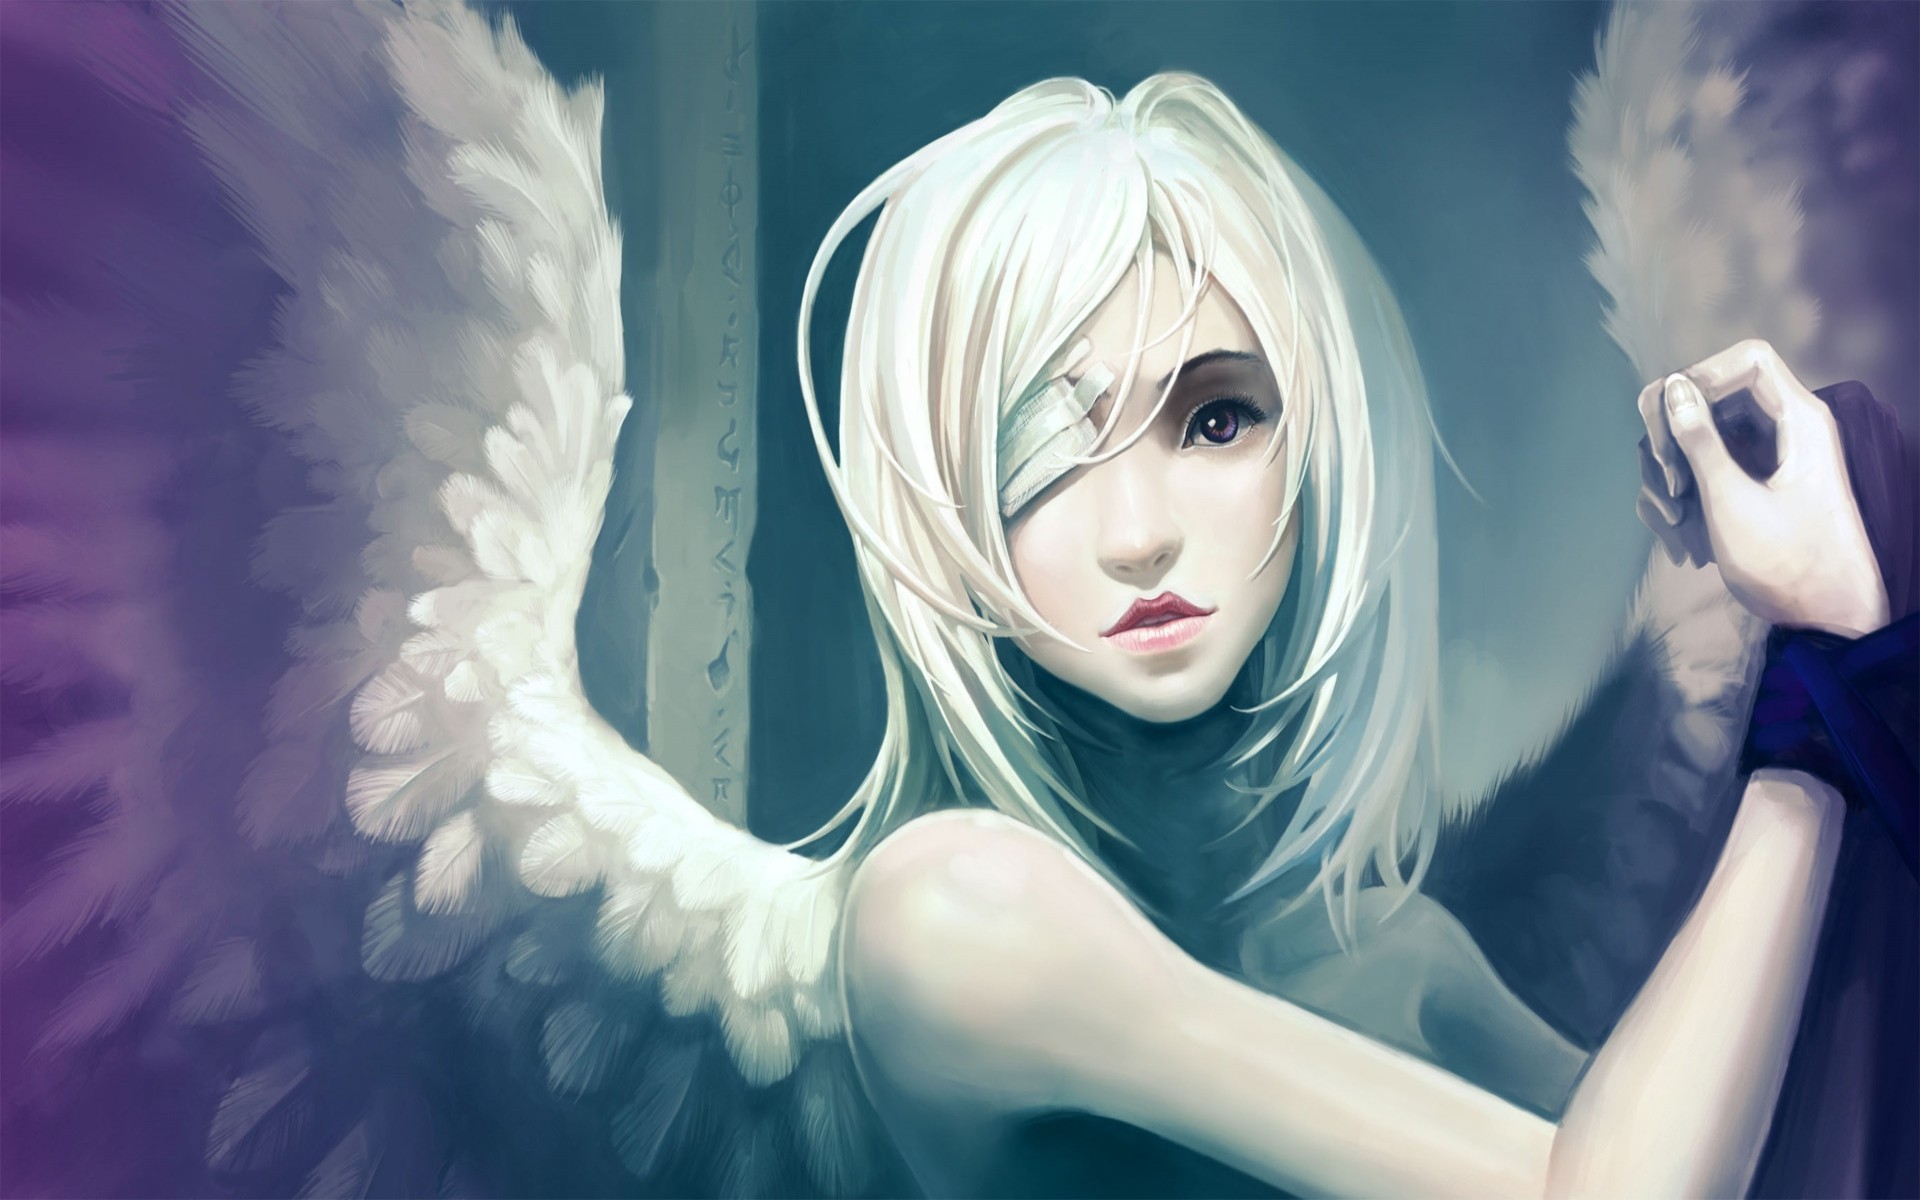 13+ Anime Angel Wallpapers for iPhone and Android by Sandra Chavez